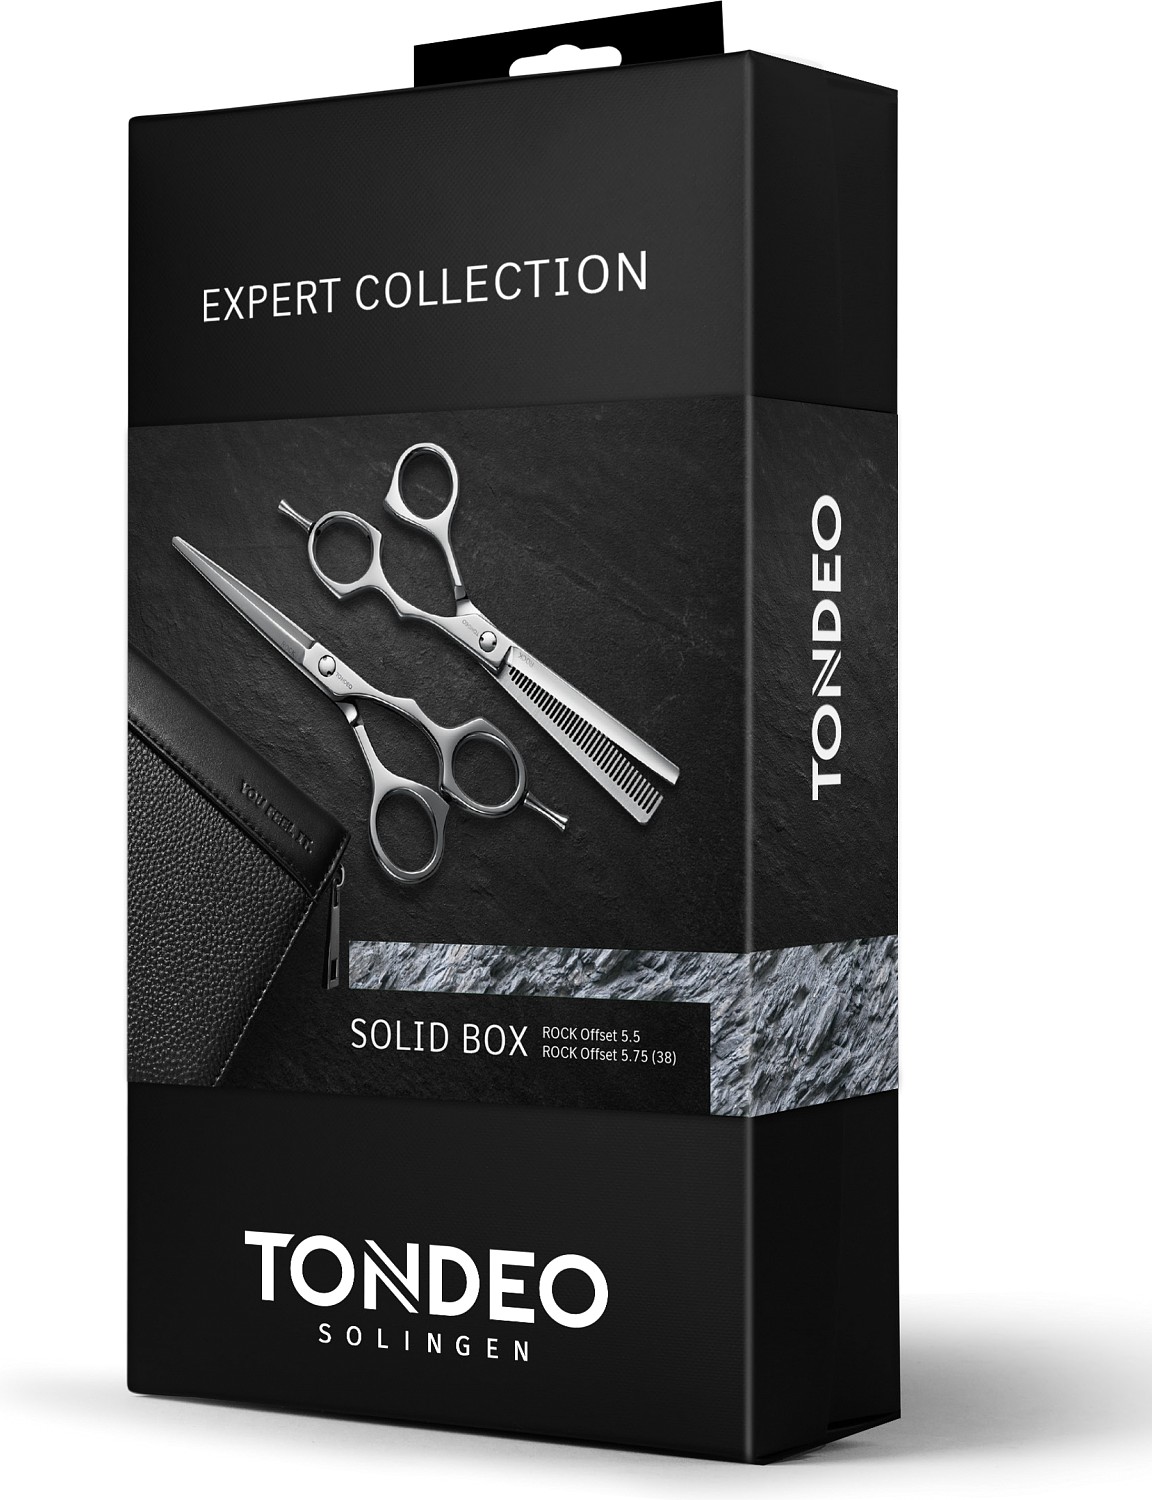  Tondeo Expert Collection Box Solid Offset 5.5 